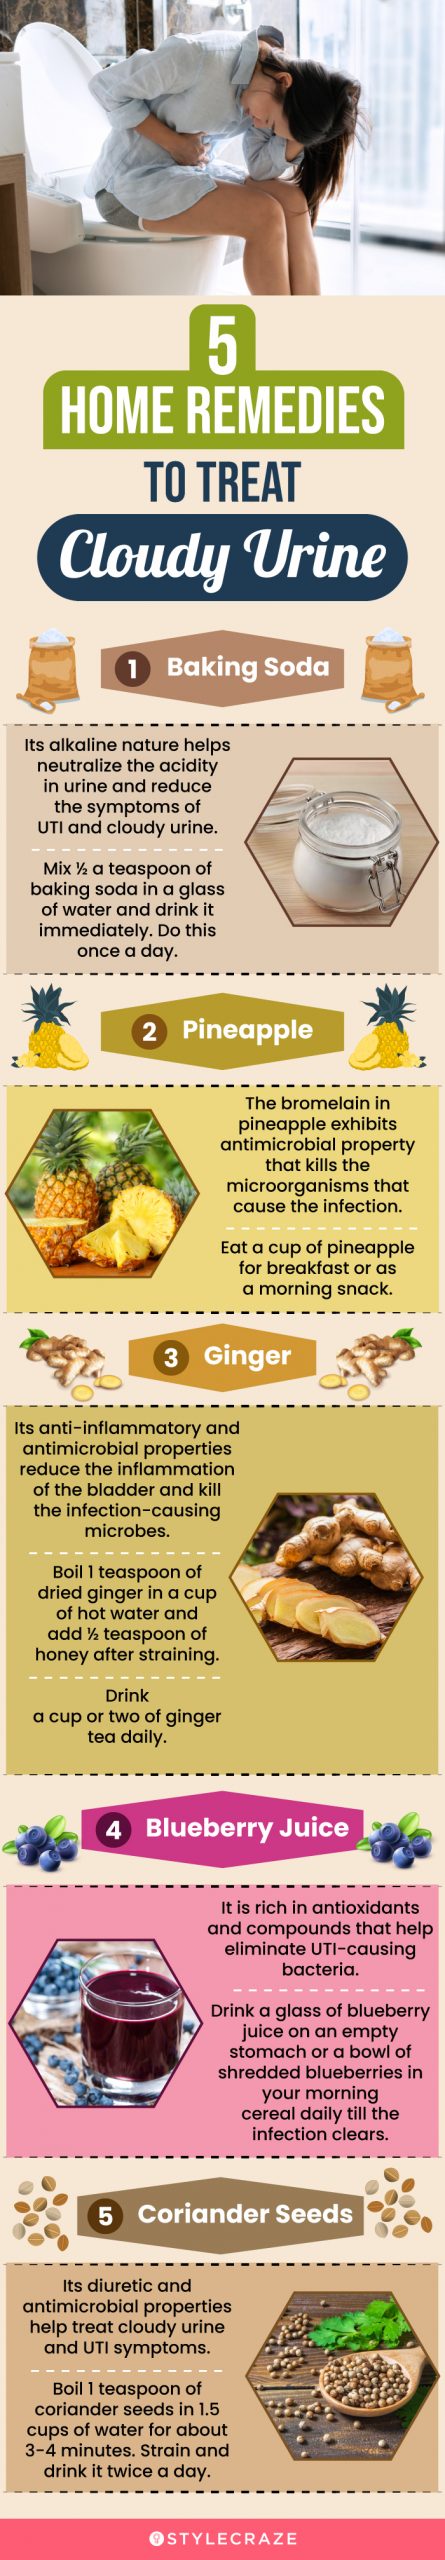 Is Urinary Incontinence Bothering You? Don't Worry! These Home Remedies  Will Cure You In A Jiffy